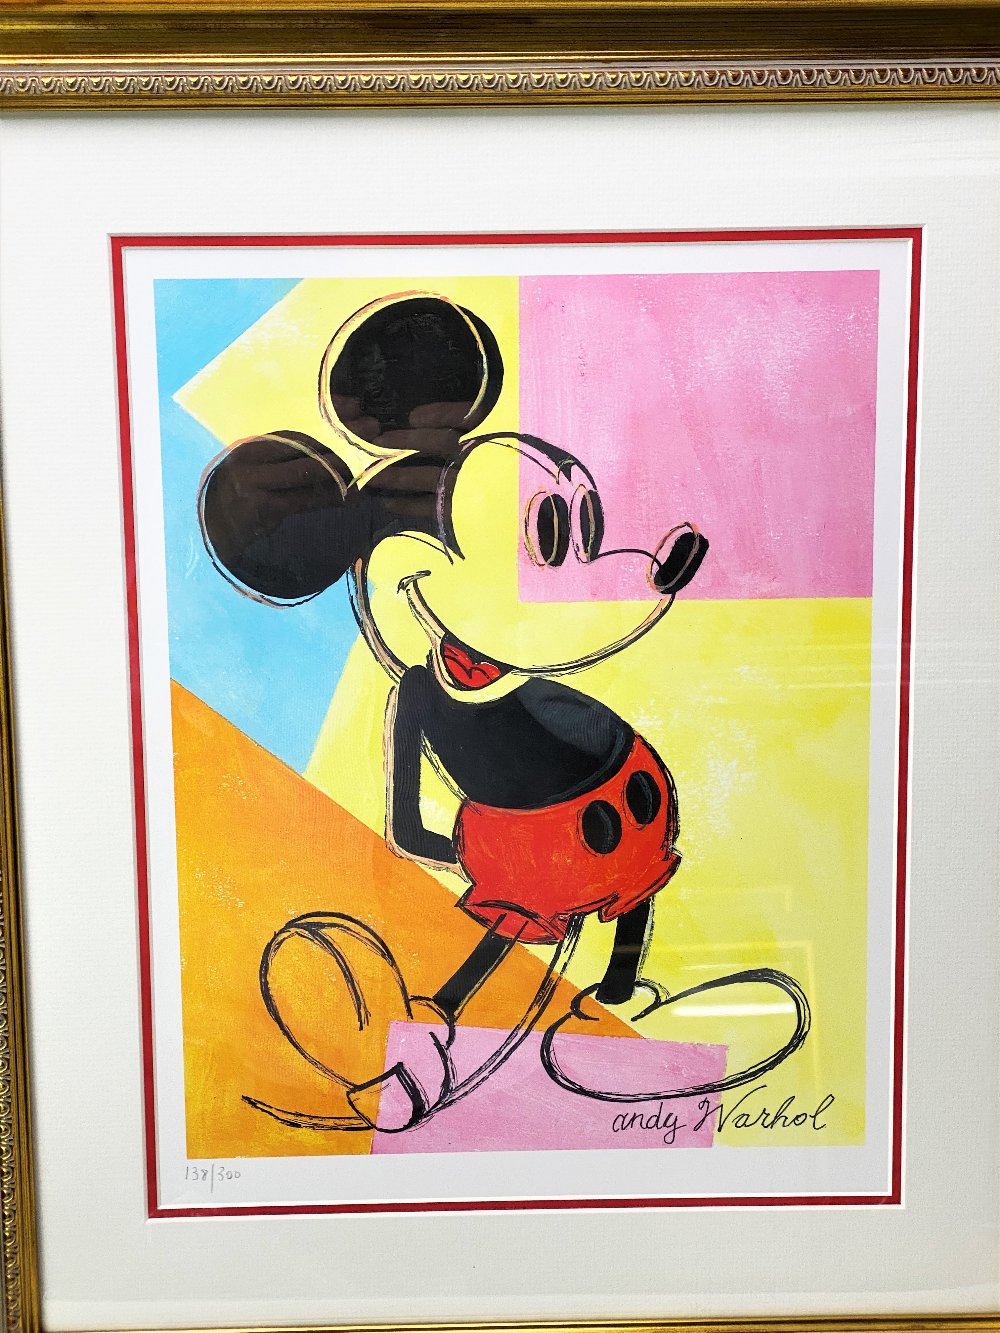 Andy Warhol (1928-1987) “Mickey” Numbered Lithograph, Ornate Framed. - Image 2 of 6